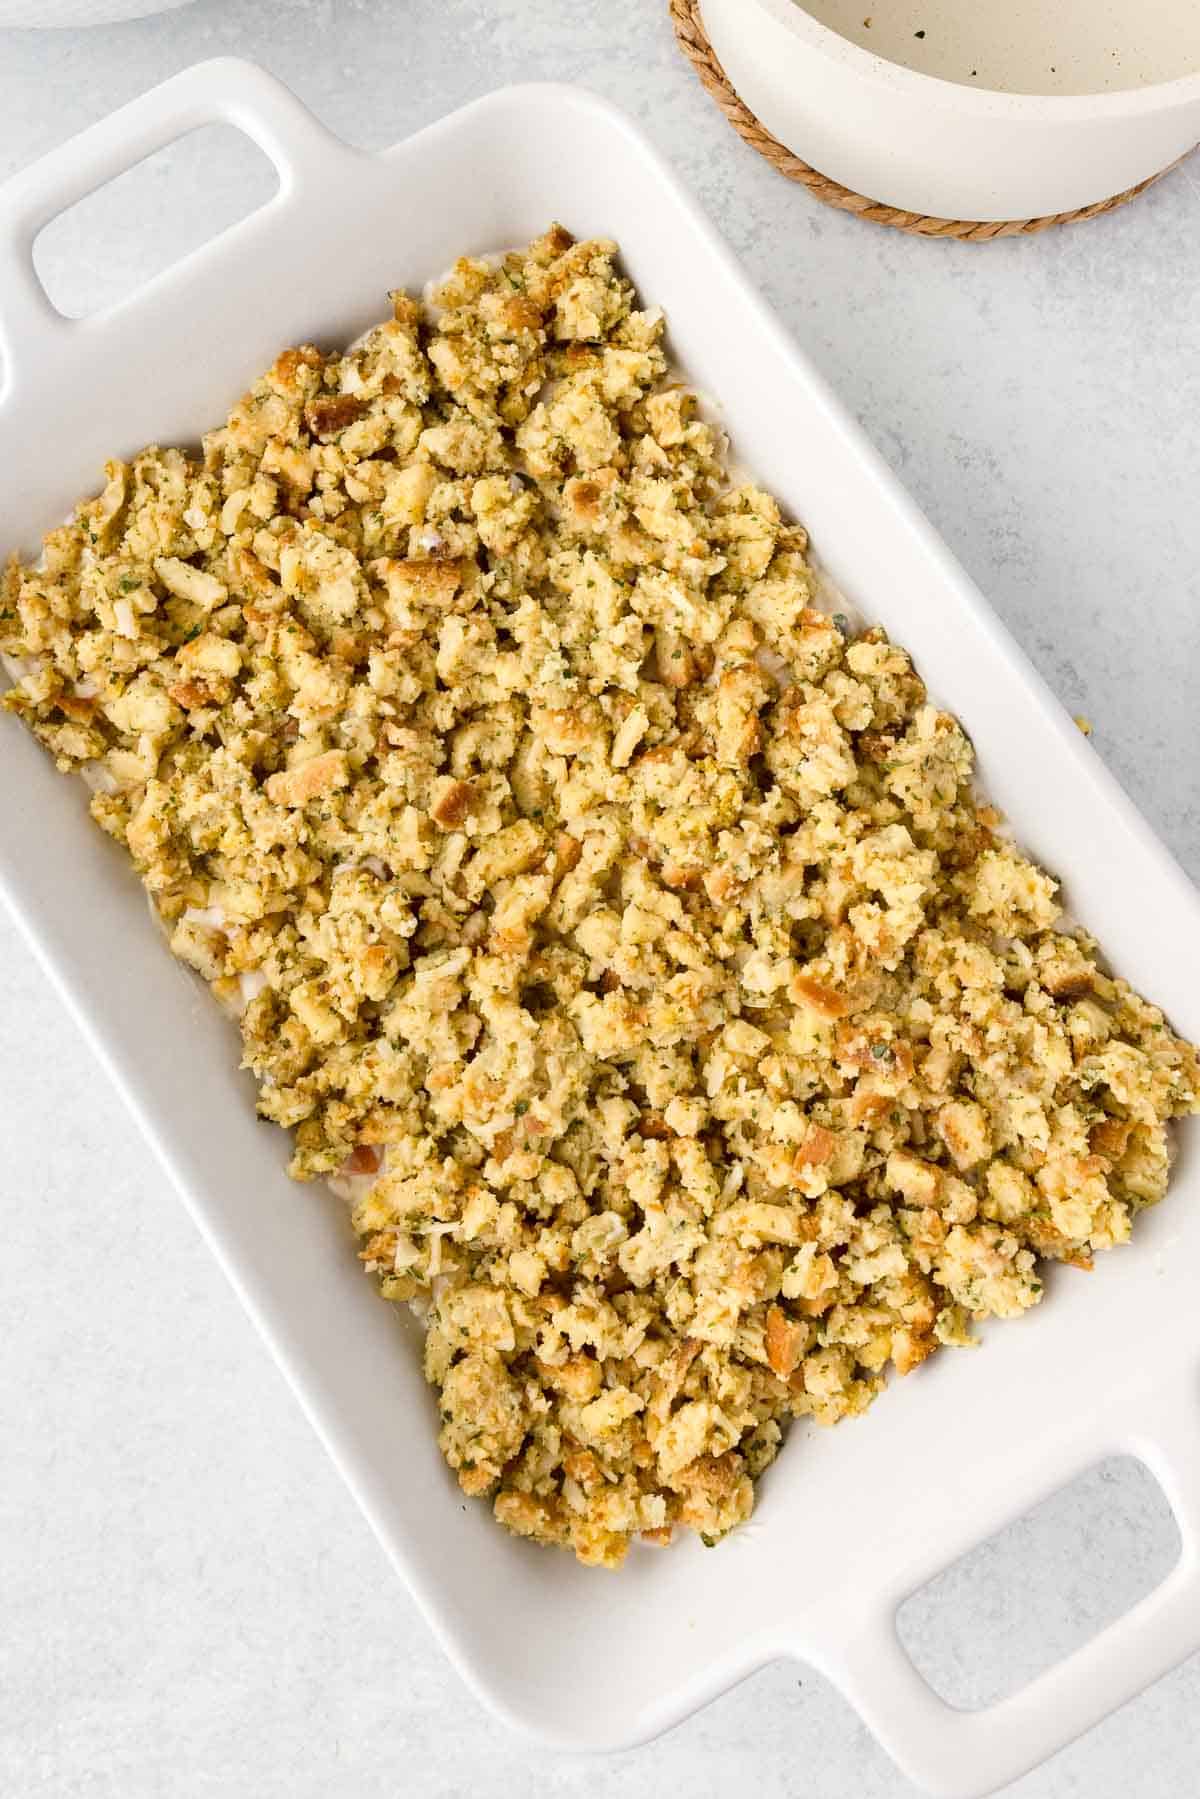 Stuffing spread evenly over the chicken mixture in a casserole dish